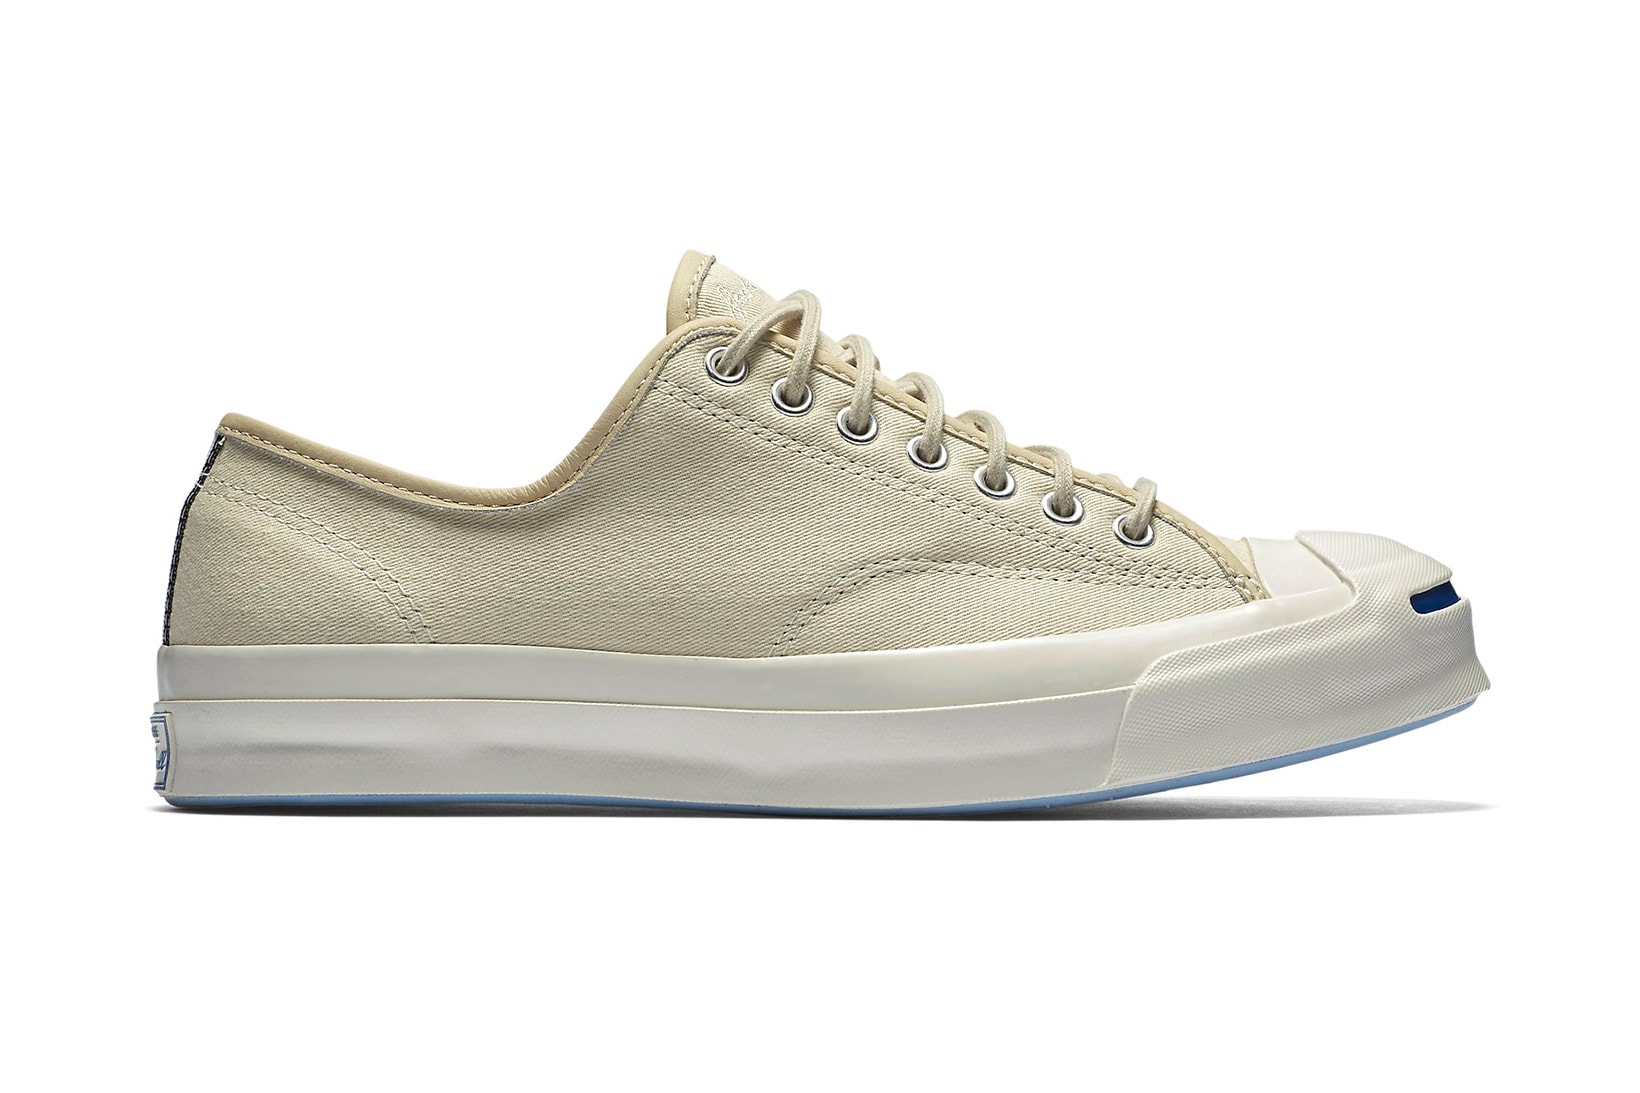 Converse Jack Purcell Counter Climate beige black 